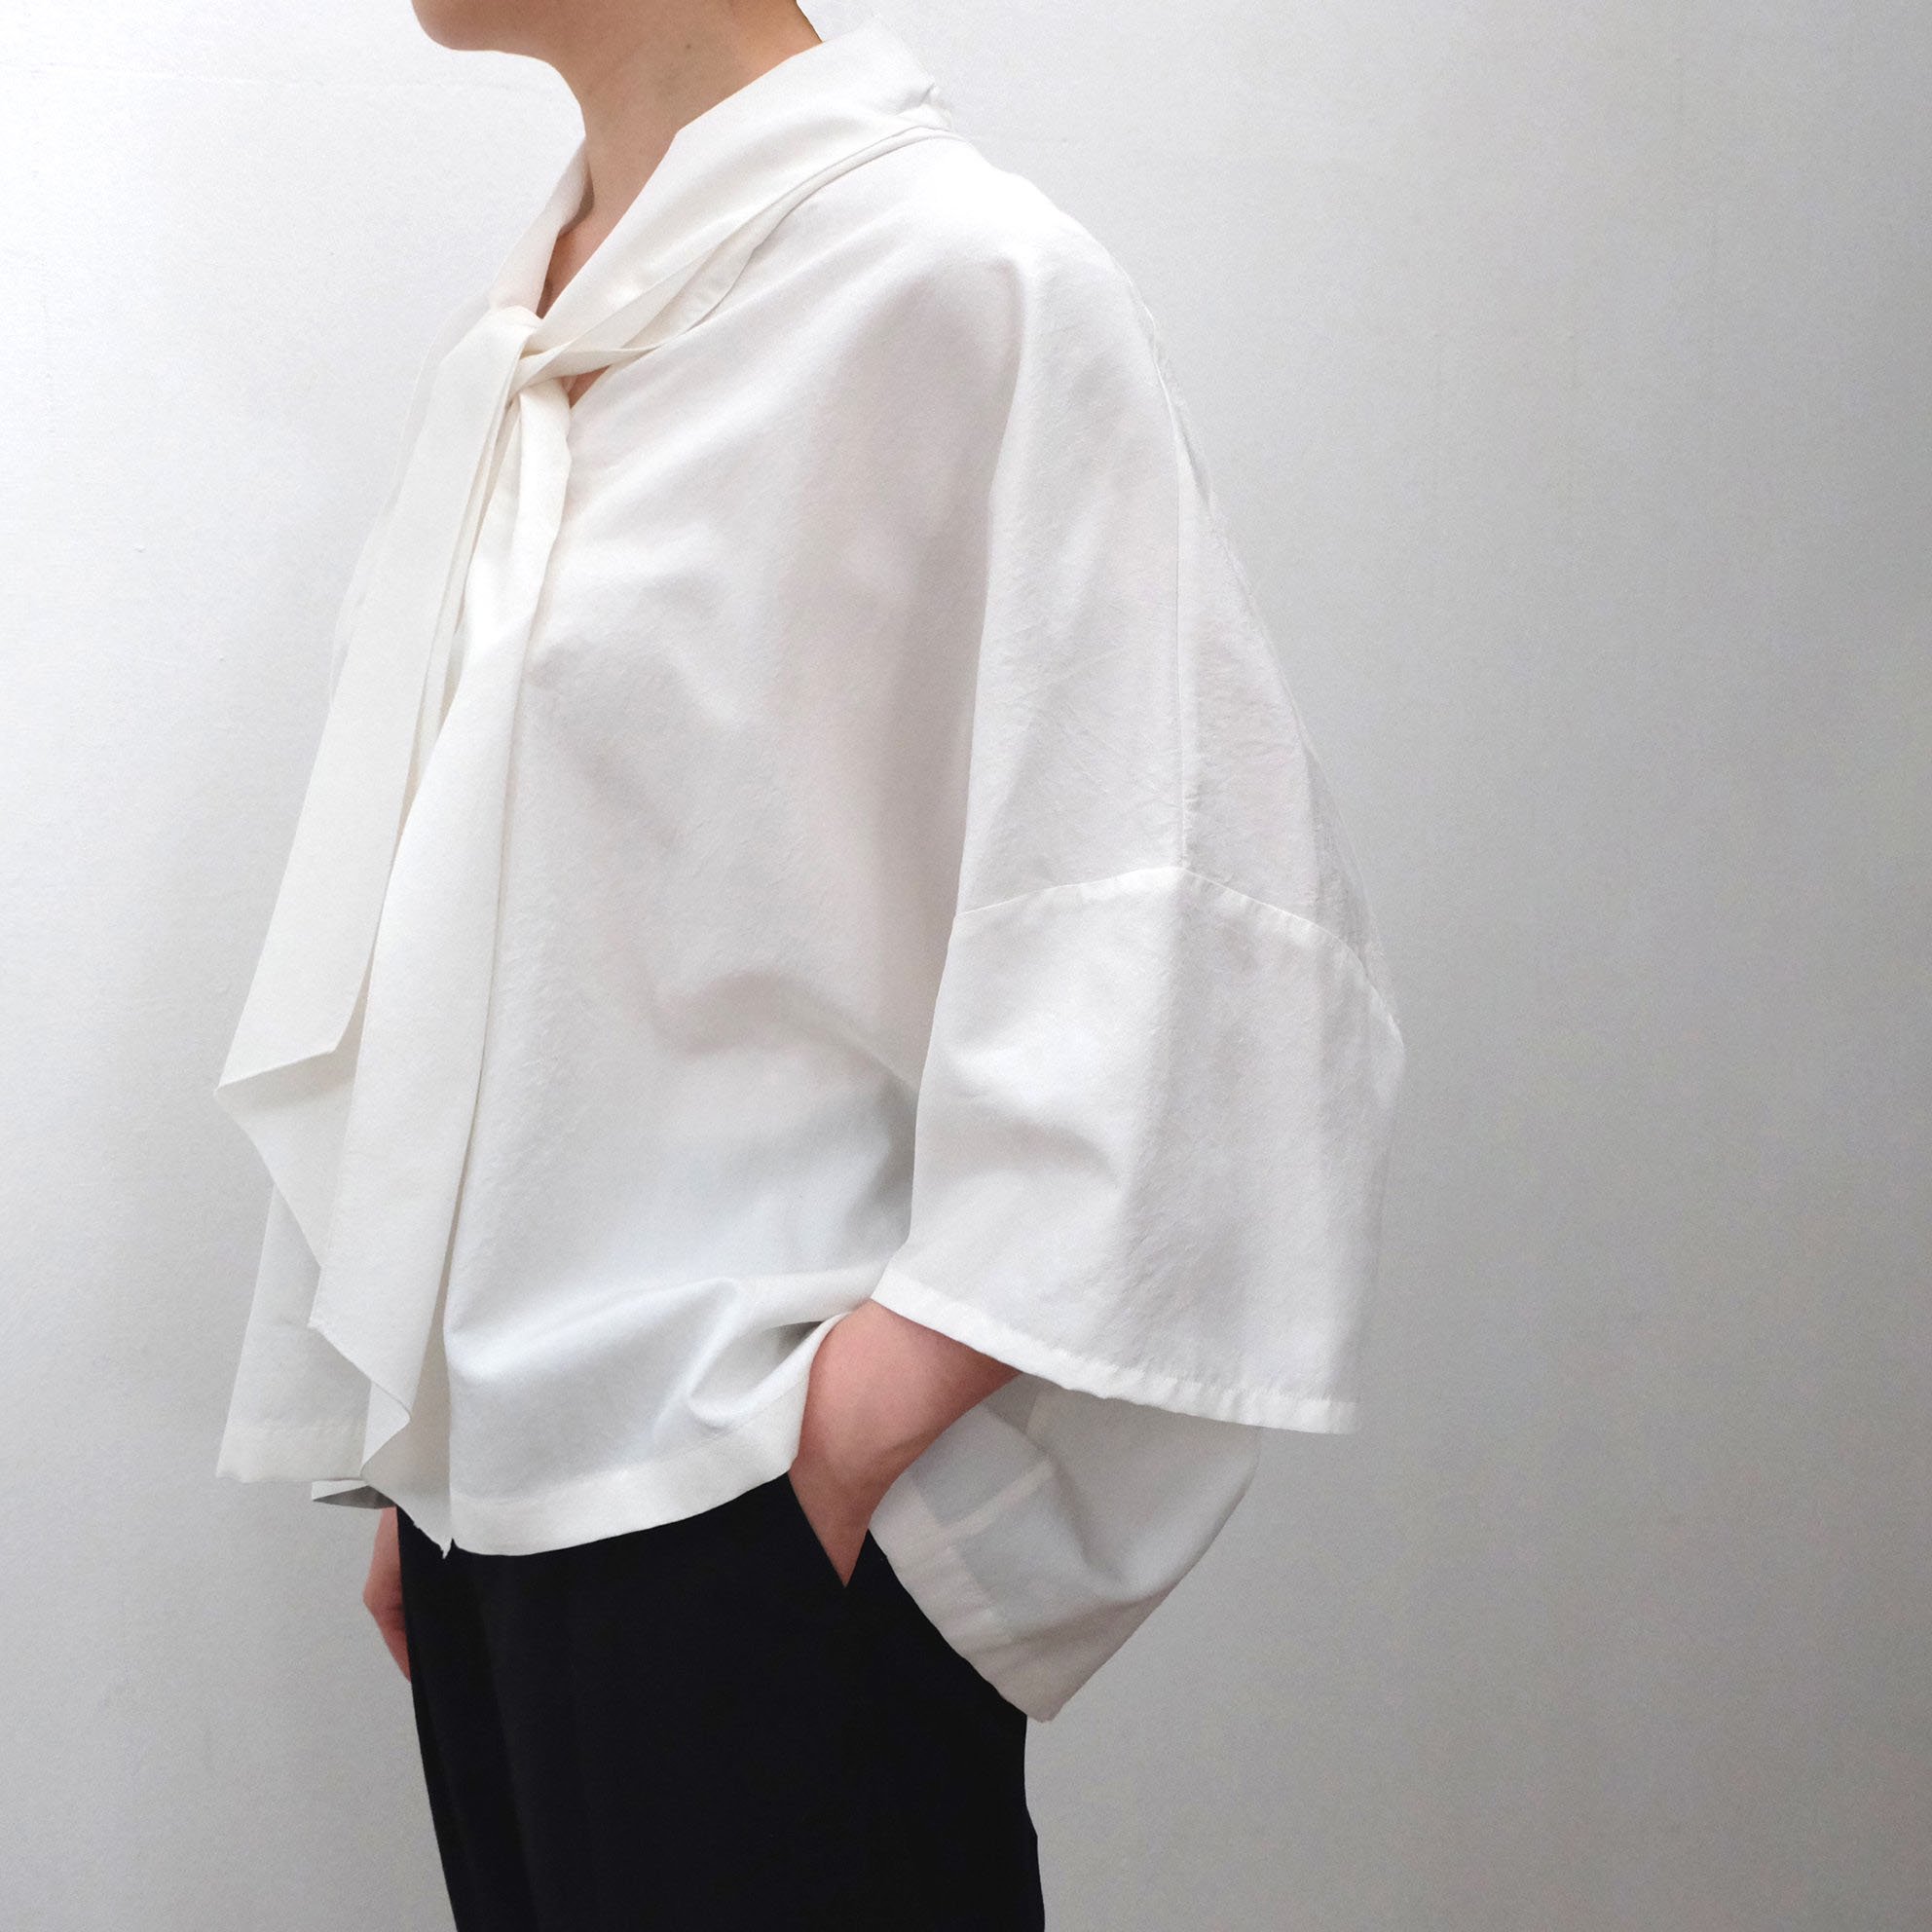 humoresque / bow tie blouse 【JS2207a】 - くるみの木